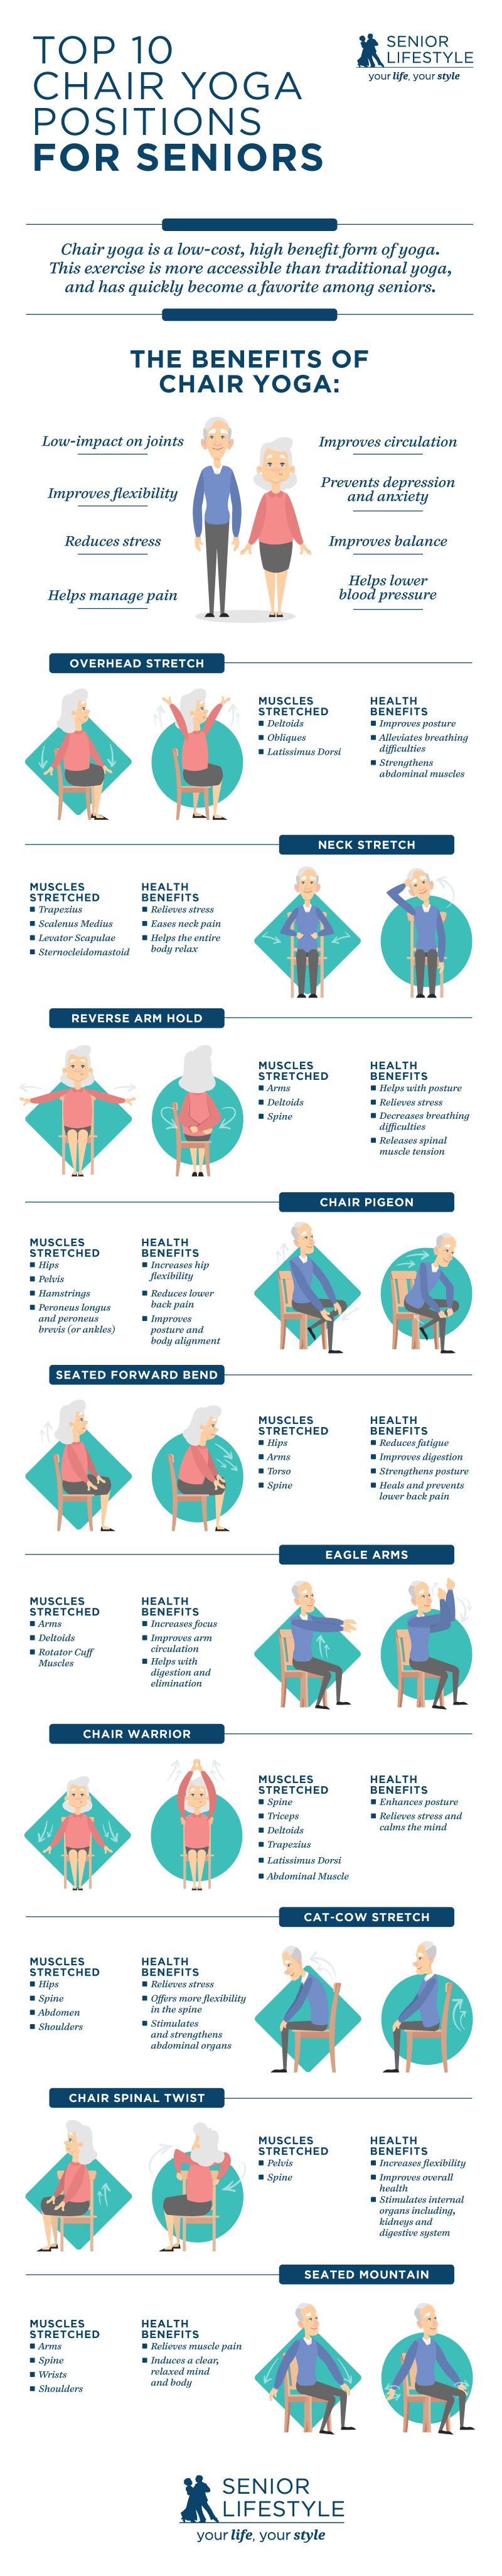 Top 10 Chair Yoga Positions for Seniors 